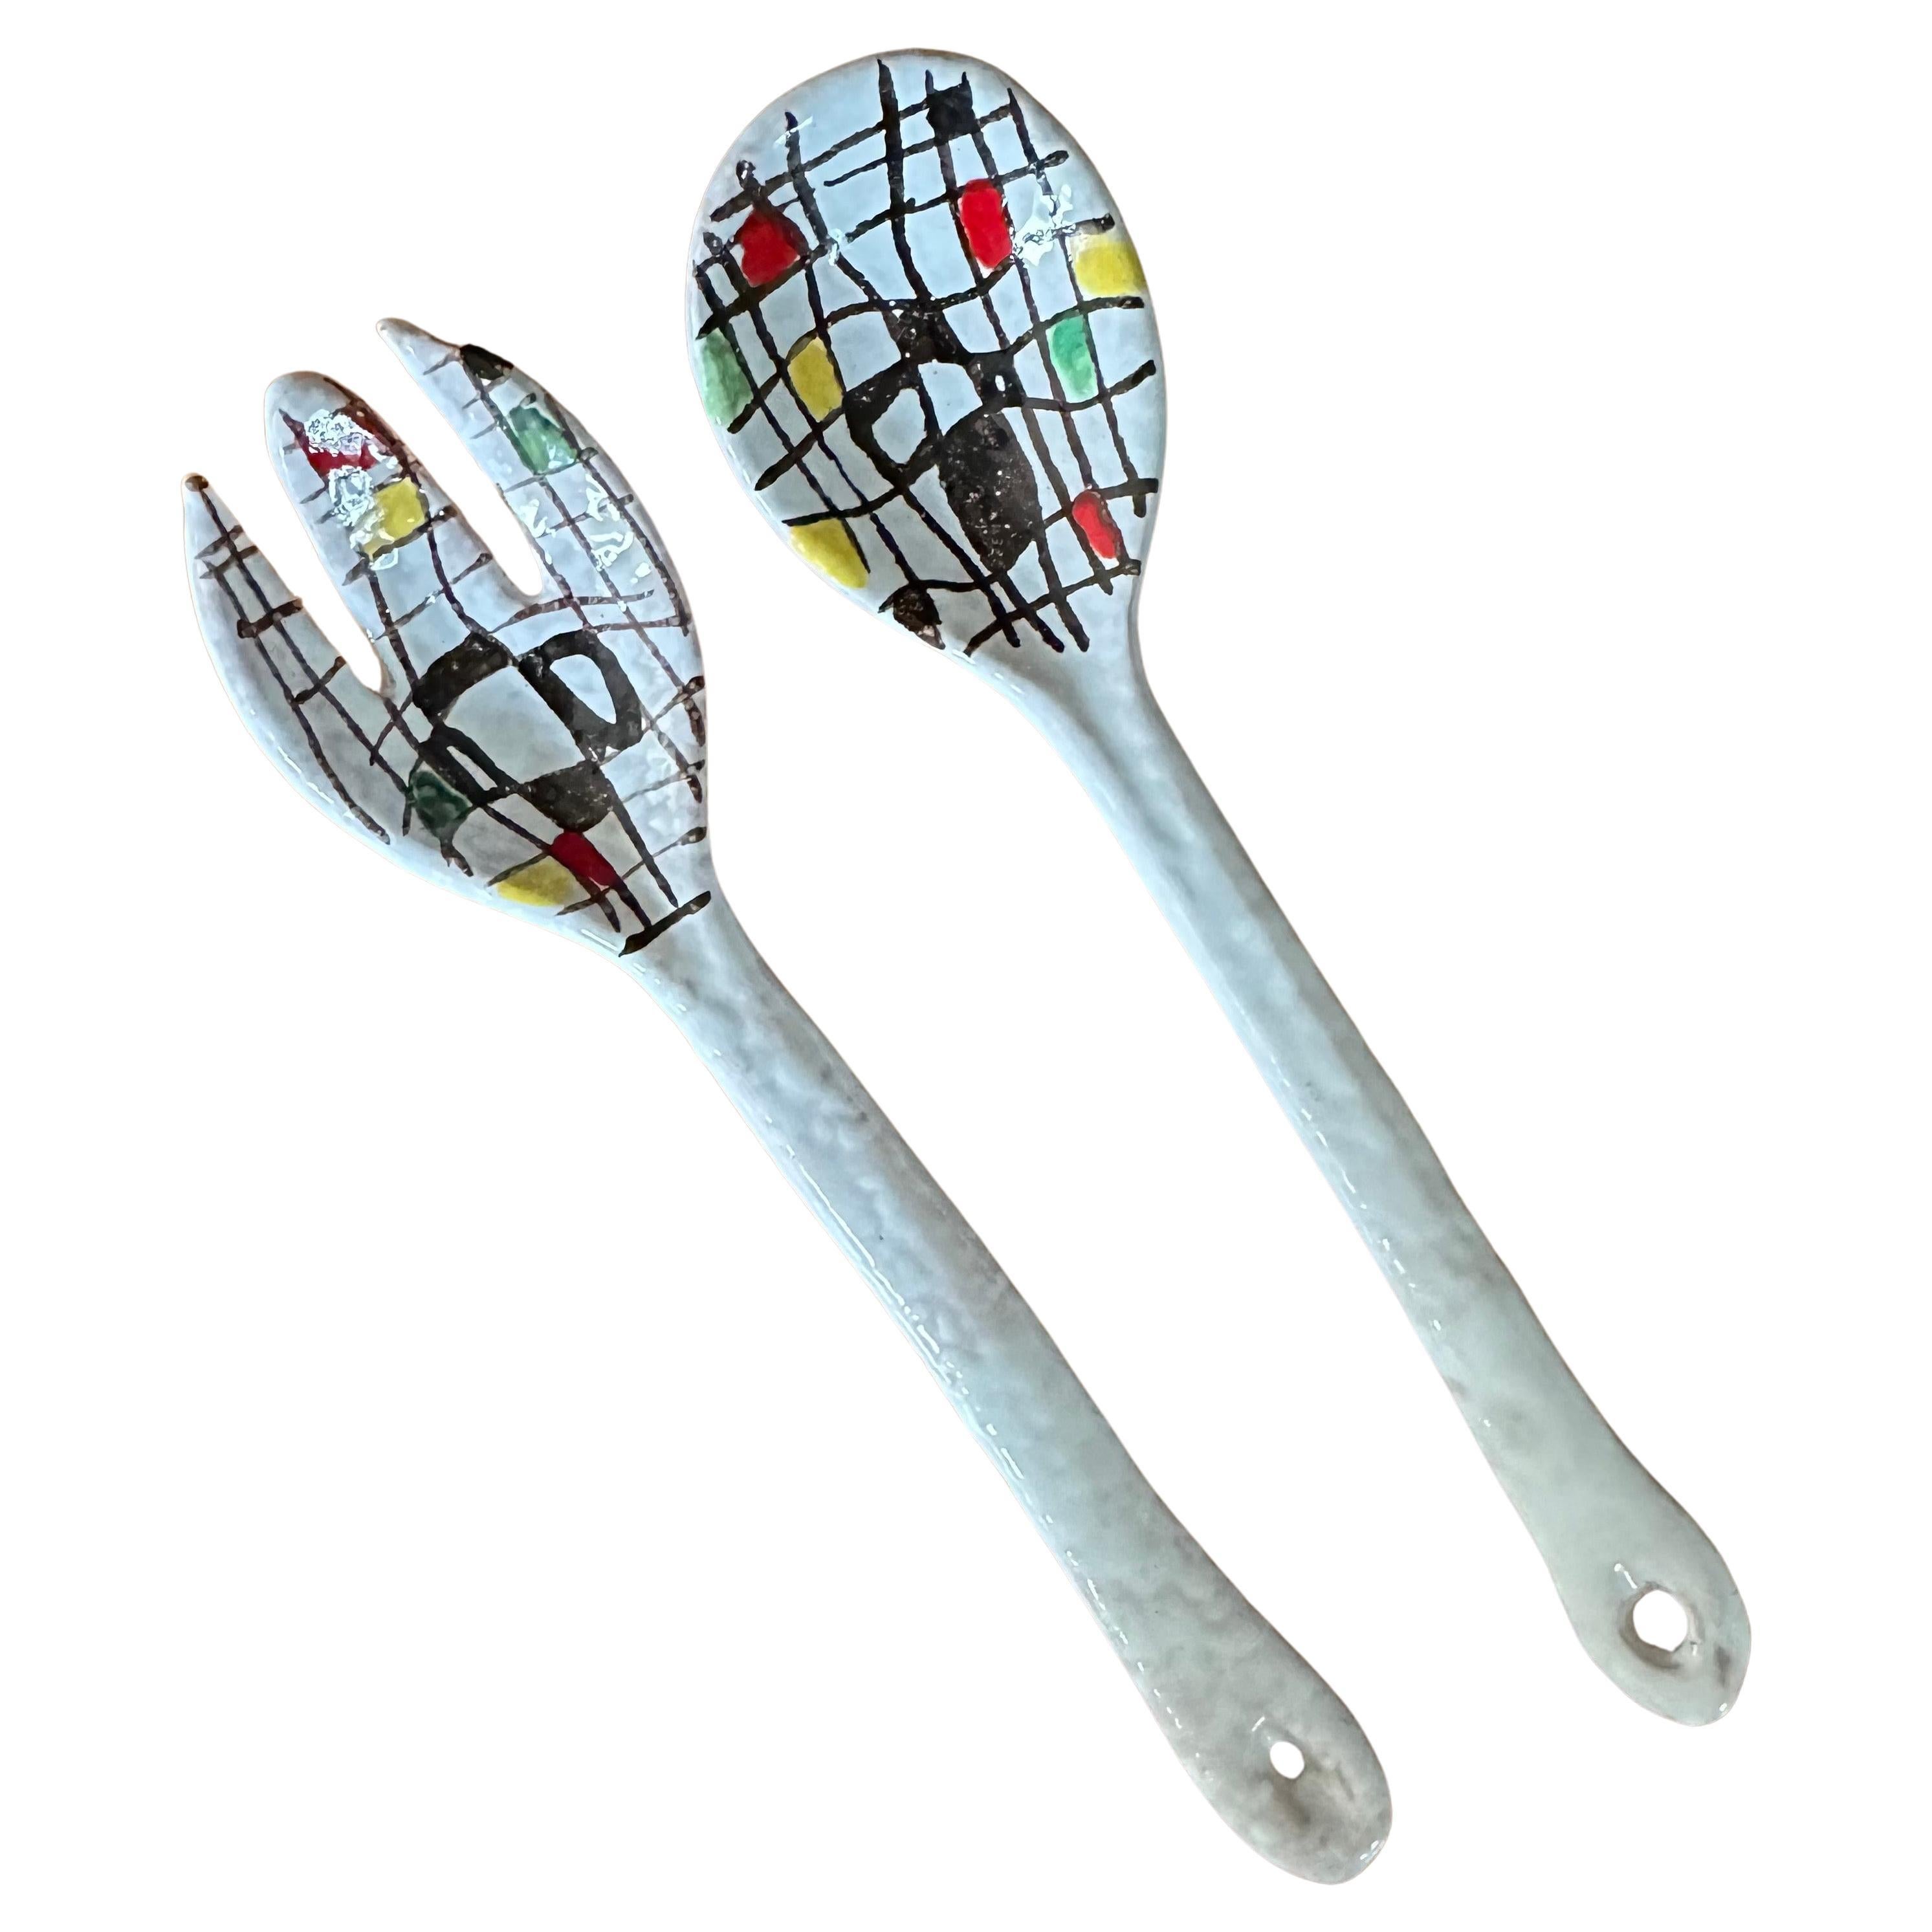 A nice pair of Italian post-modern ceramic salad servers, circa 1980s.  The set is in very good vintage condition and measures 2.75